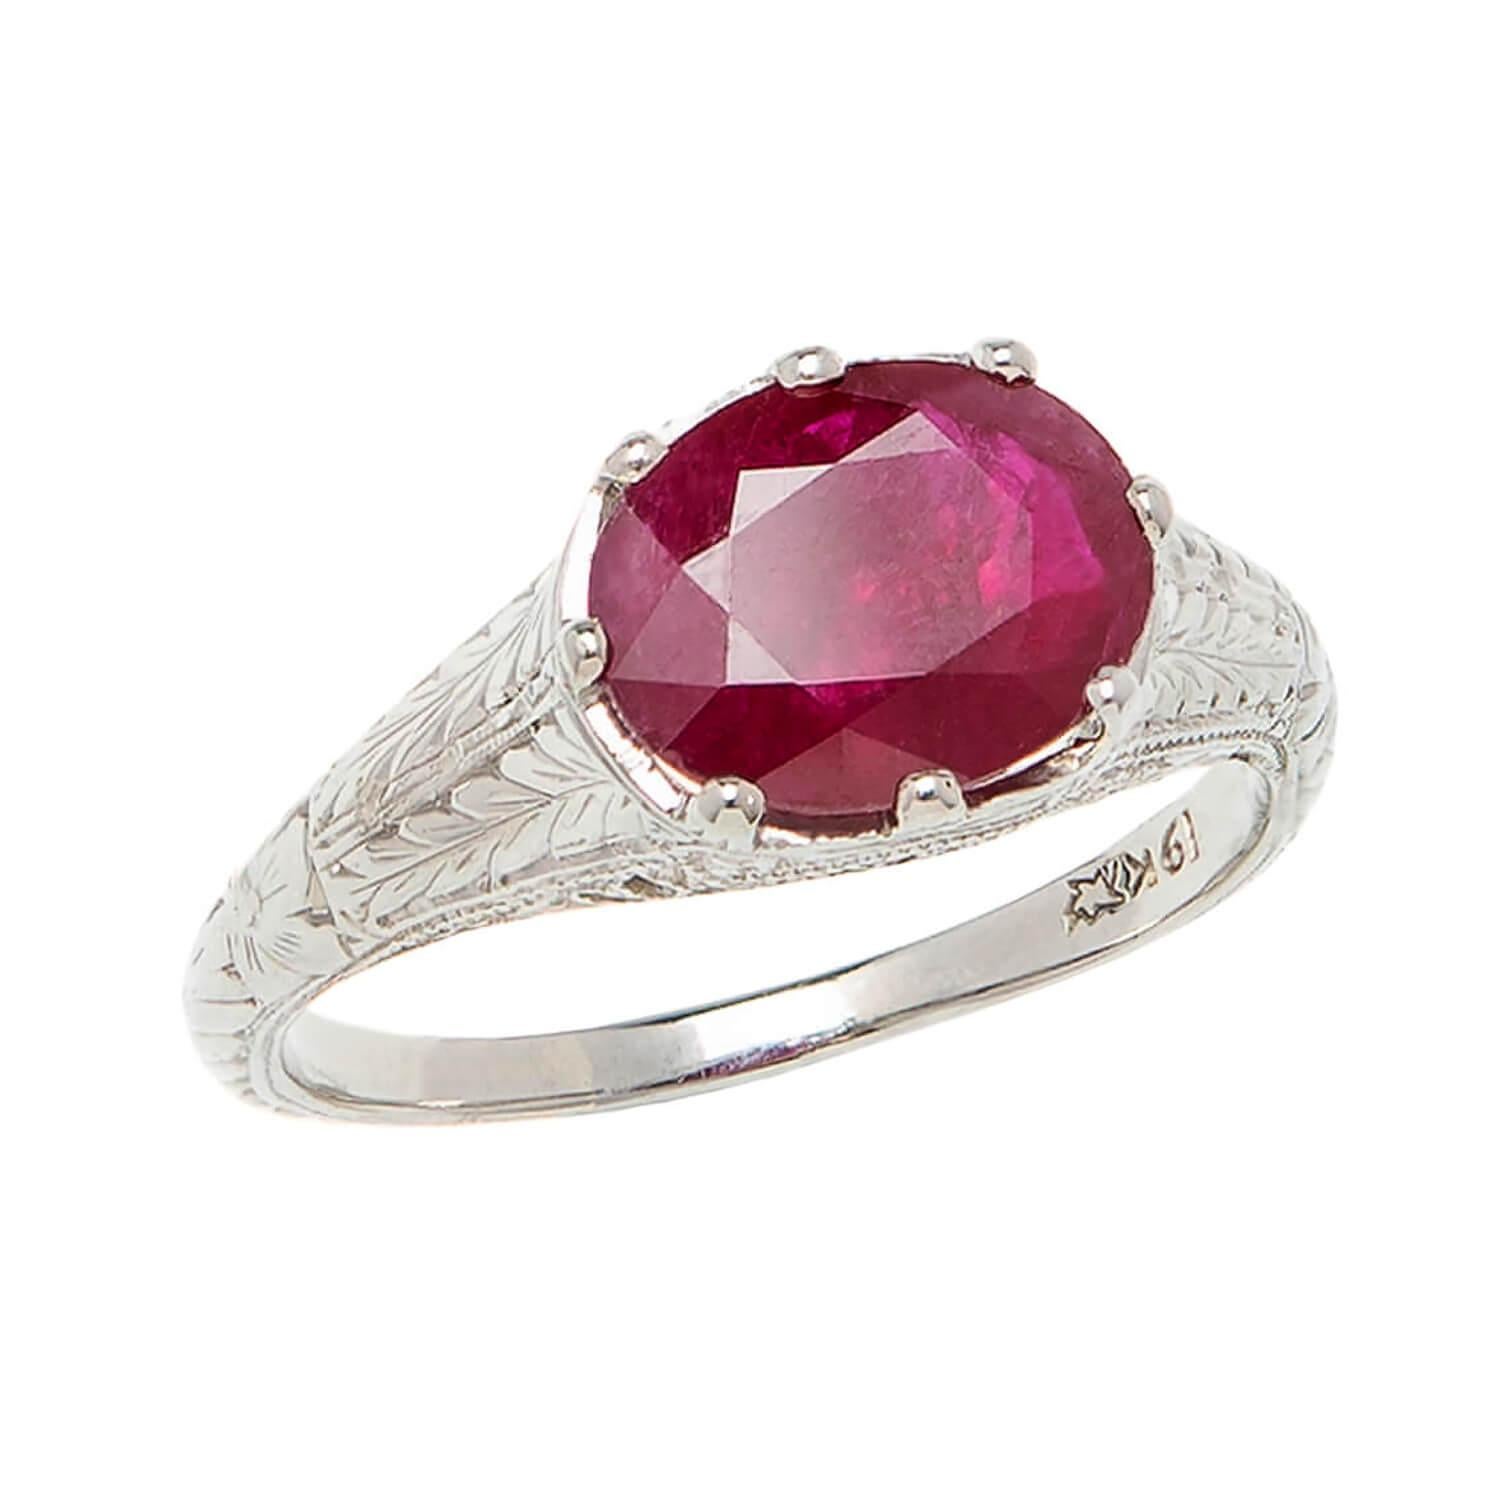 Oval Cut Art Deco 19k White Gold Ruby Ring 2.51ctw